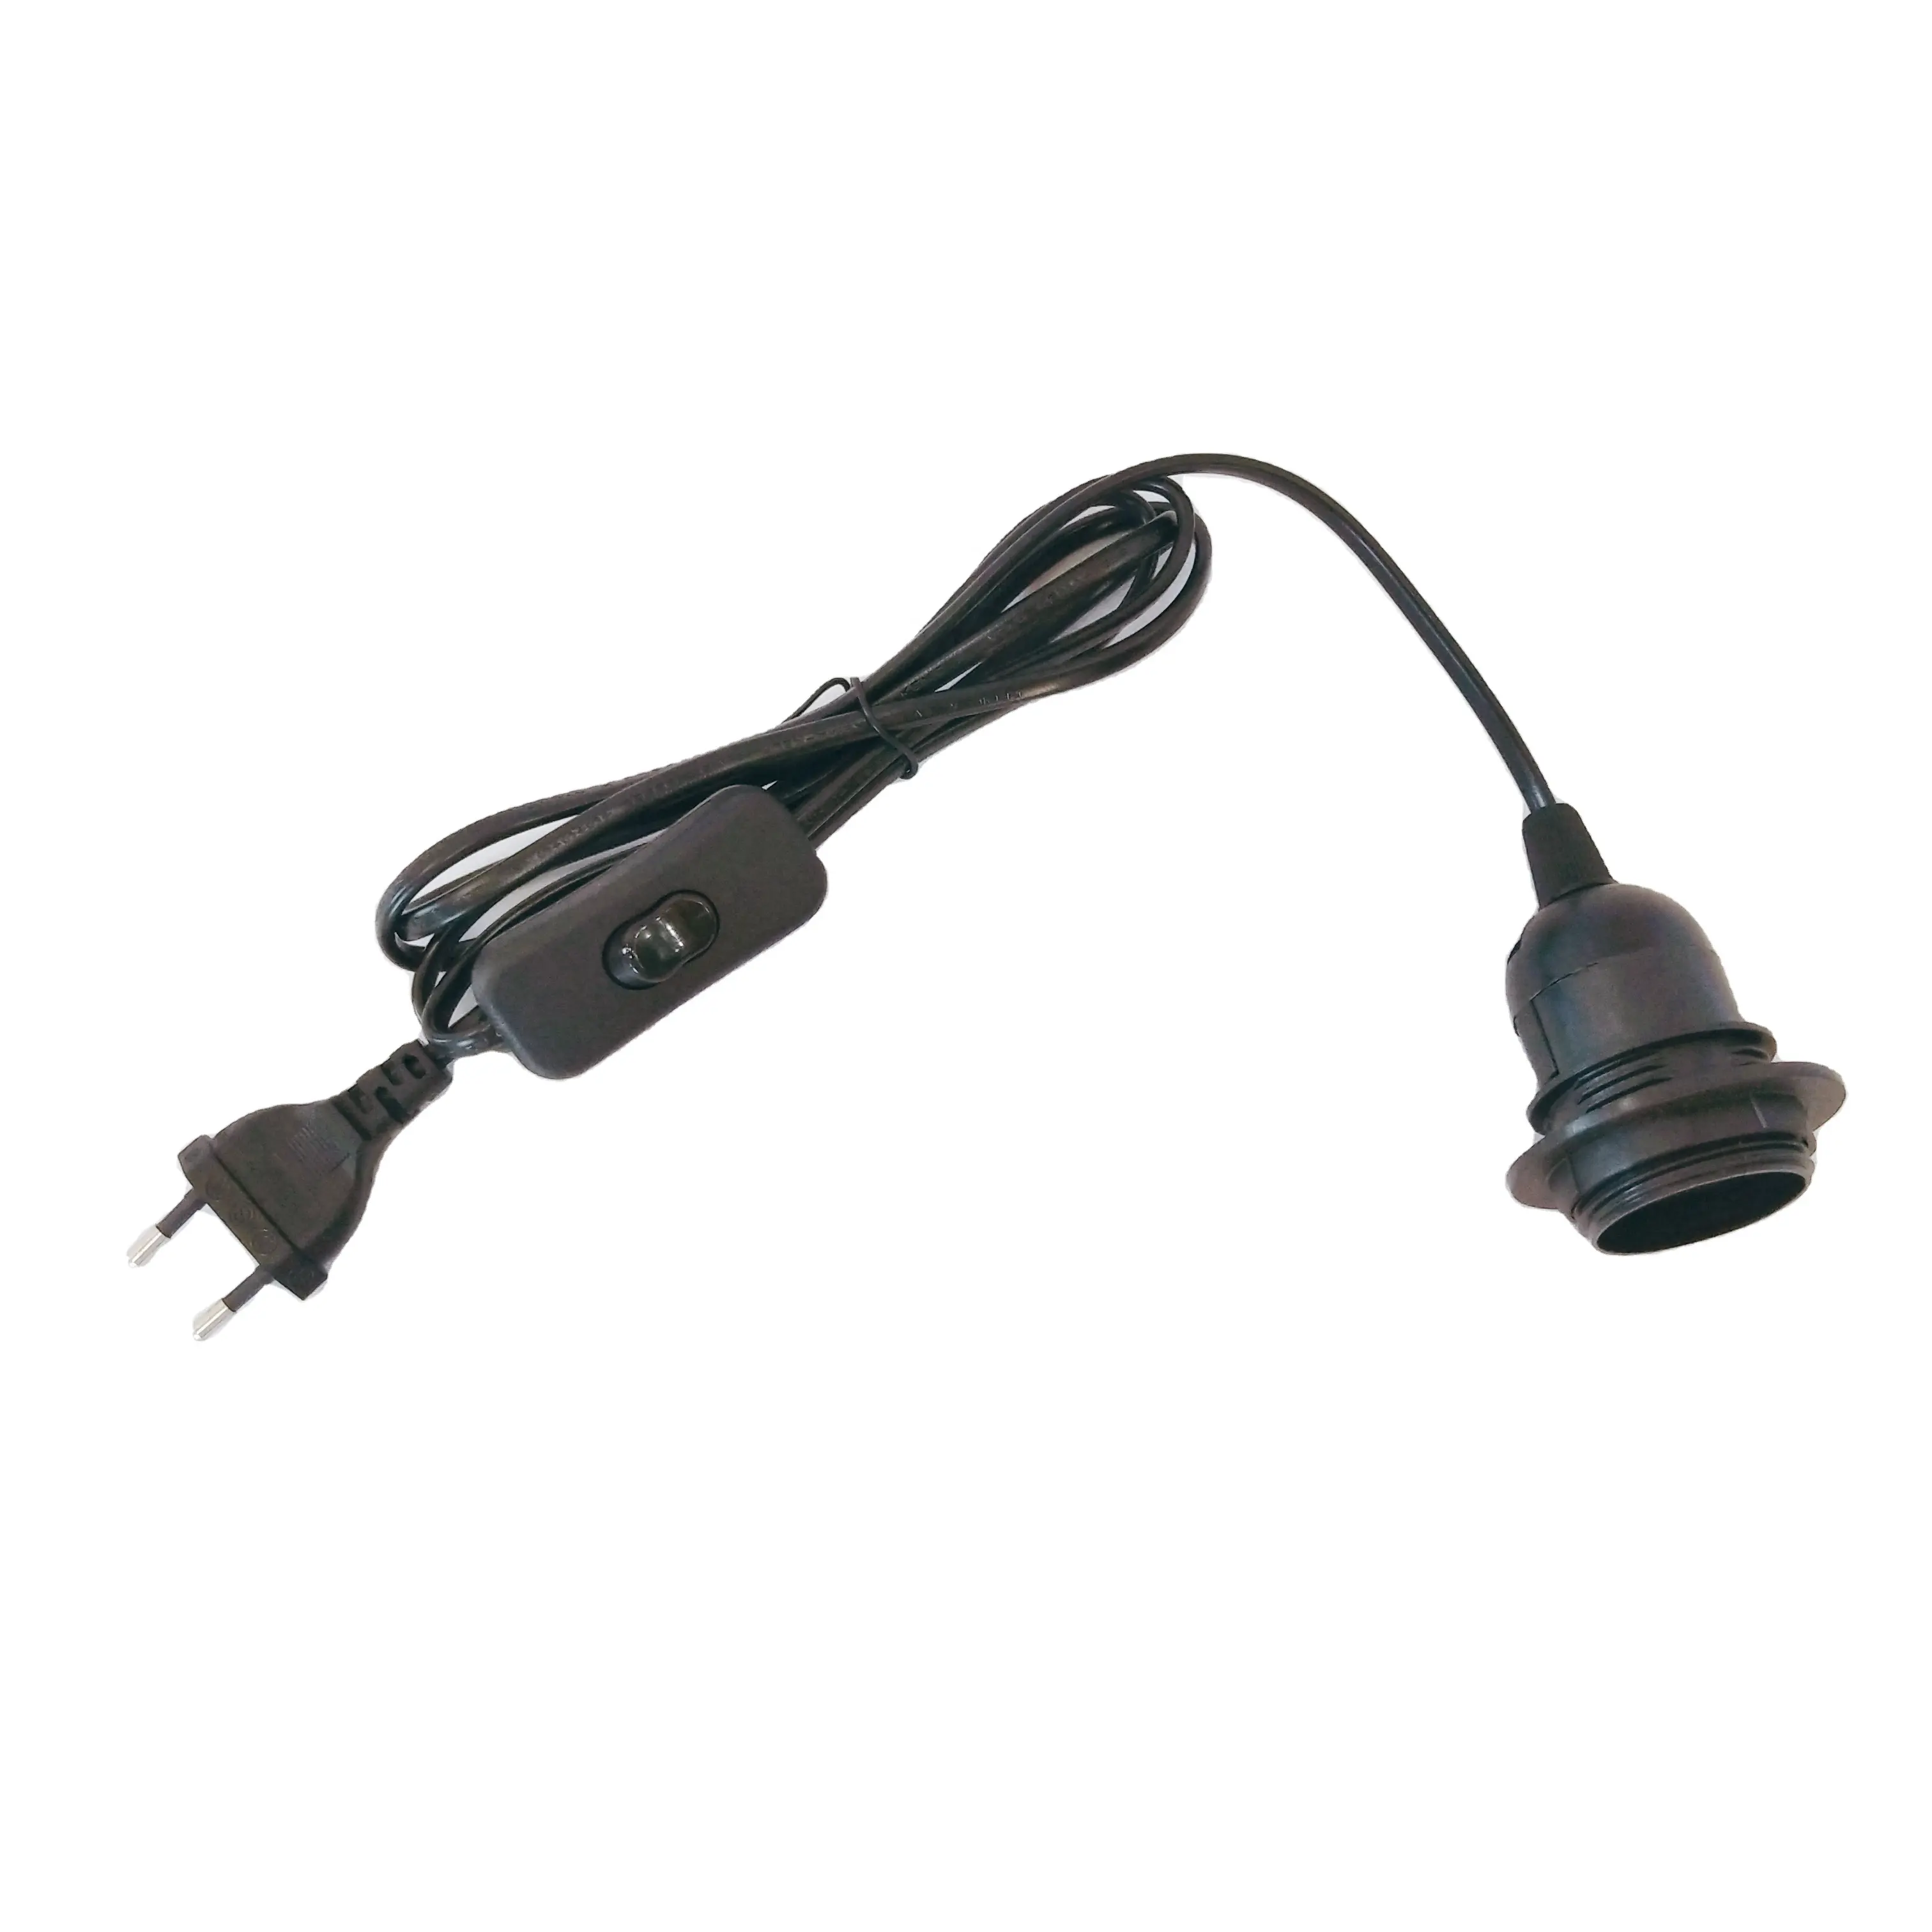 VDE 2X0.75MM2 Power Supply Cable Cord PVC Electrical Wire Cable With 2 Pin Plug And Switch And E27 Lamp Holder